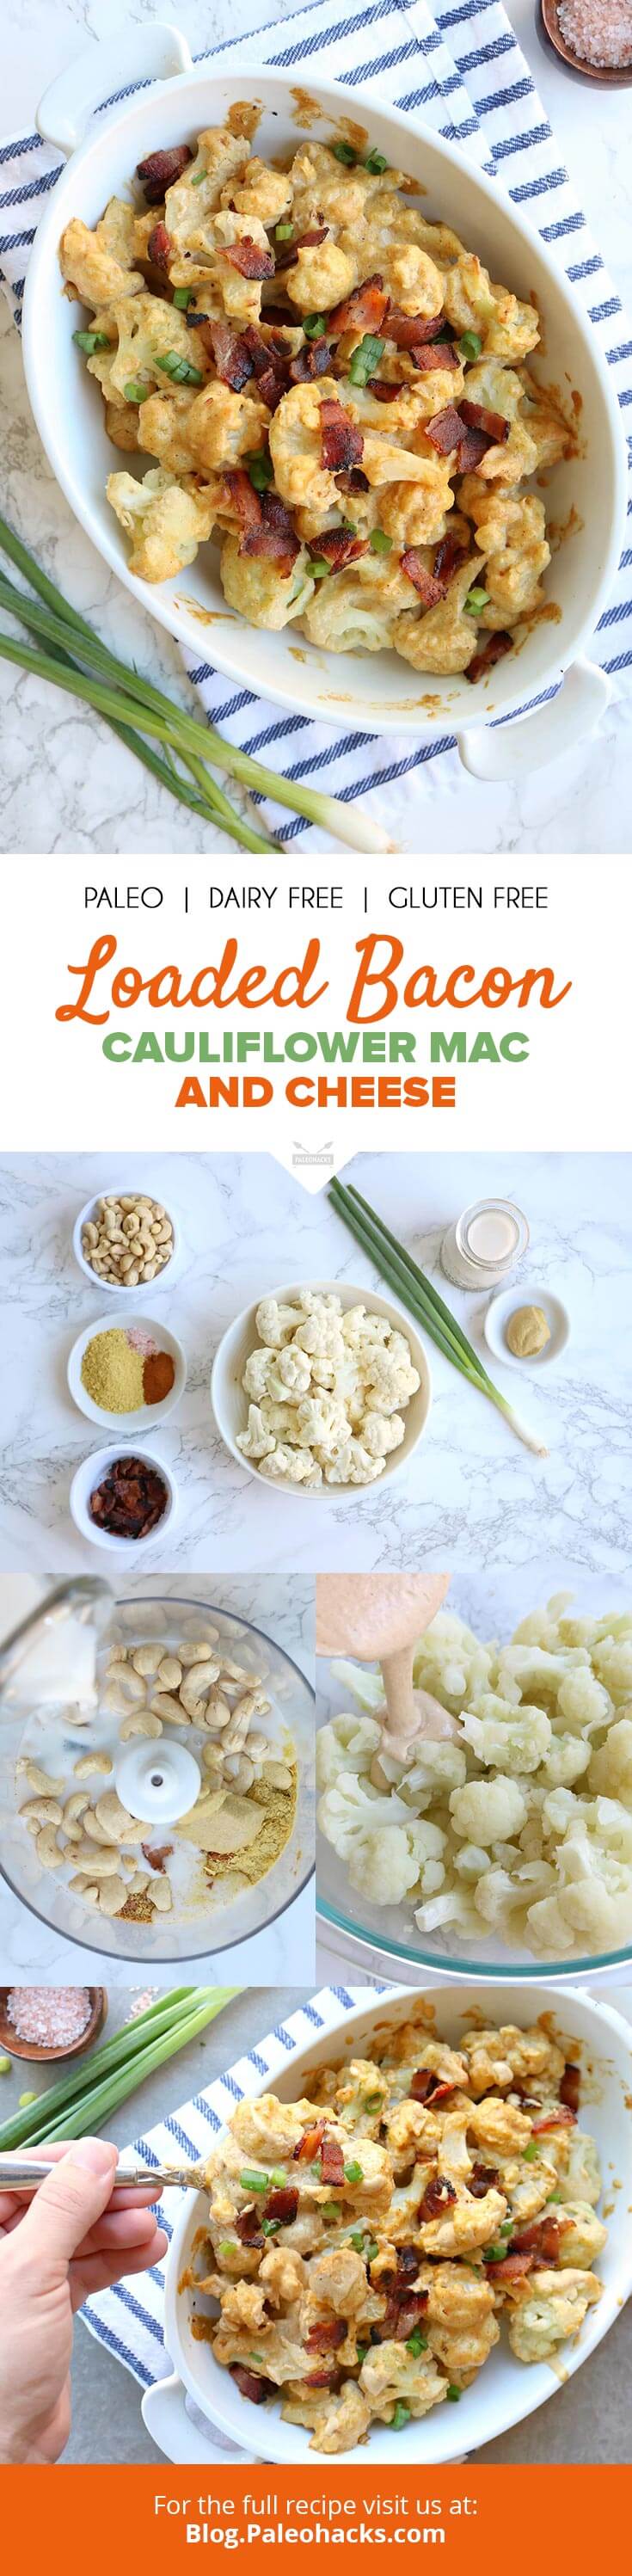 For a healthier version of a kid favorite, make these cauliflower mac and cheese bites slathered in a creamy, dairy-free sauce and loaded with bacon!